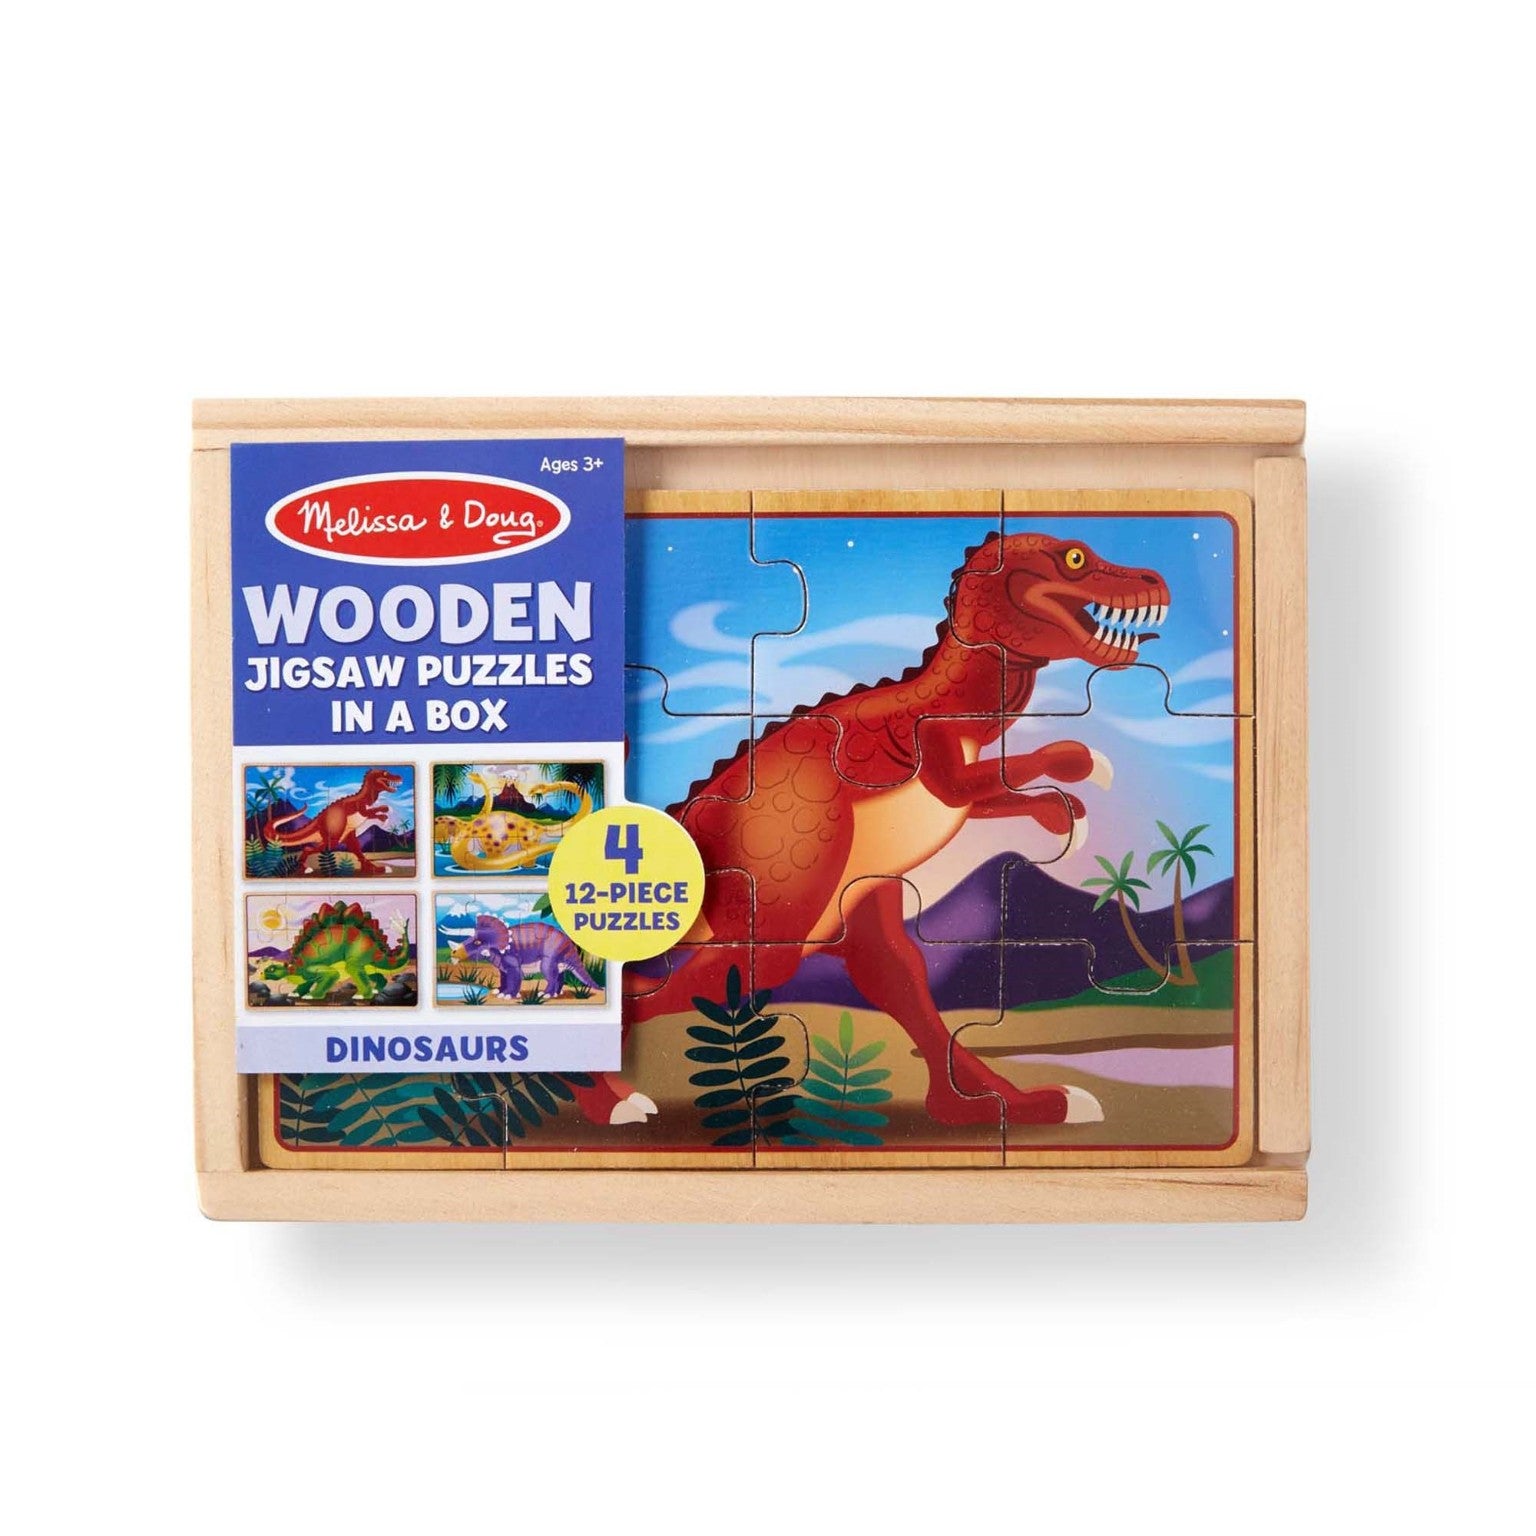 Dinosaur 4 puzzles in a Box Set